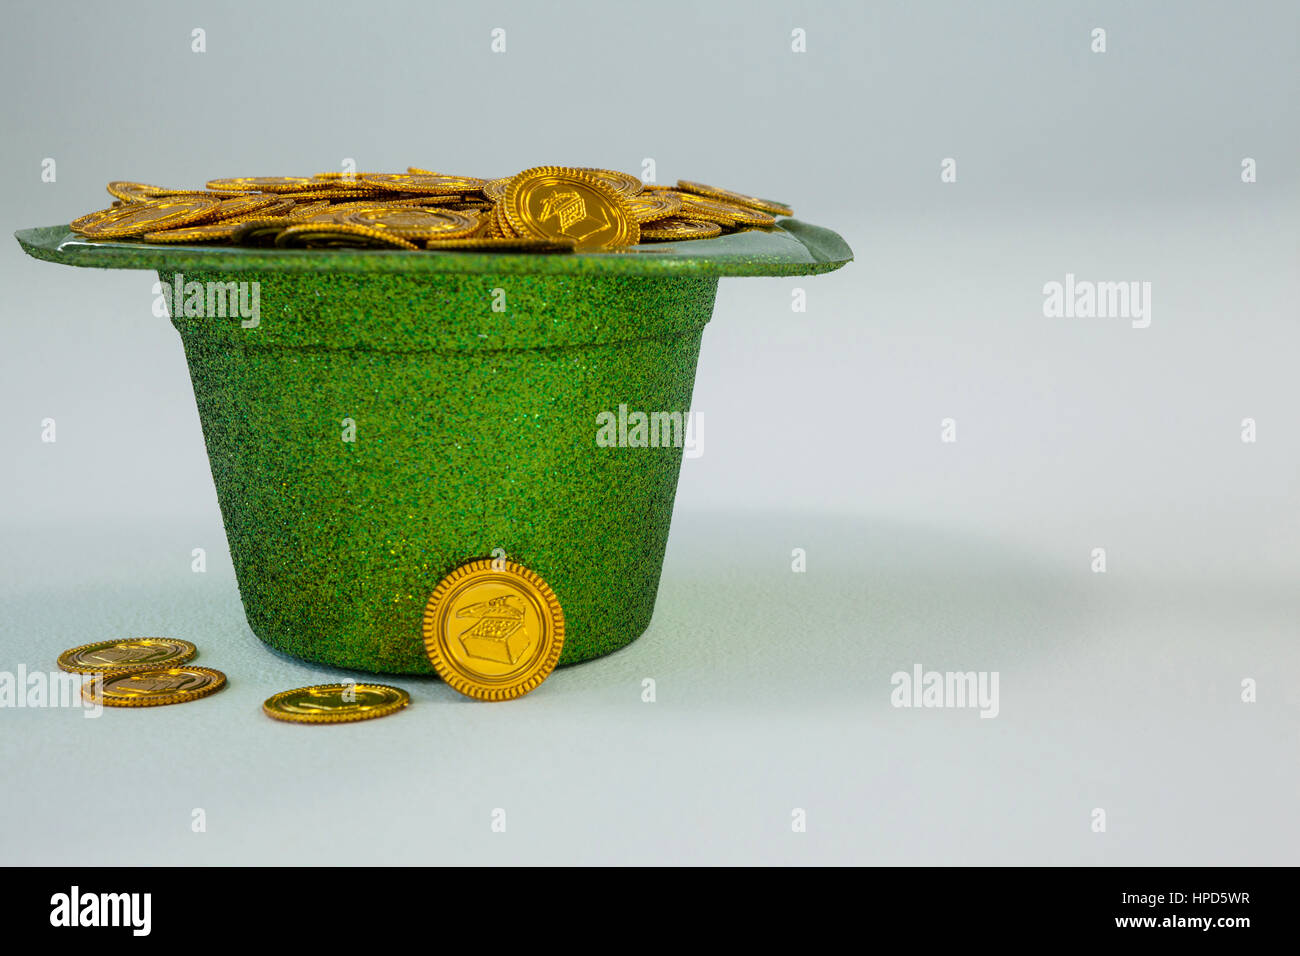 St. Patricks Day leprechaun hat filled with chocolate gold coins ...